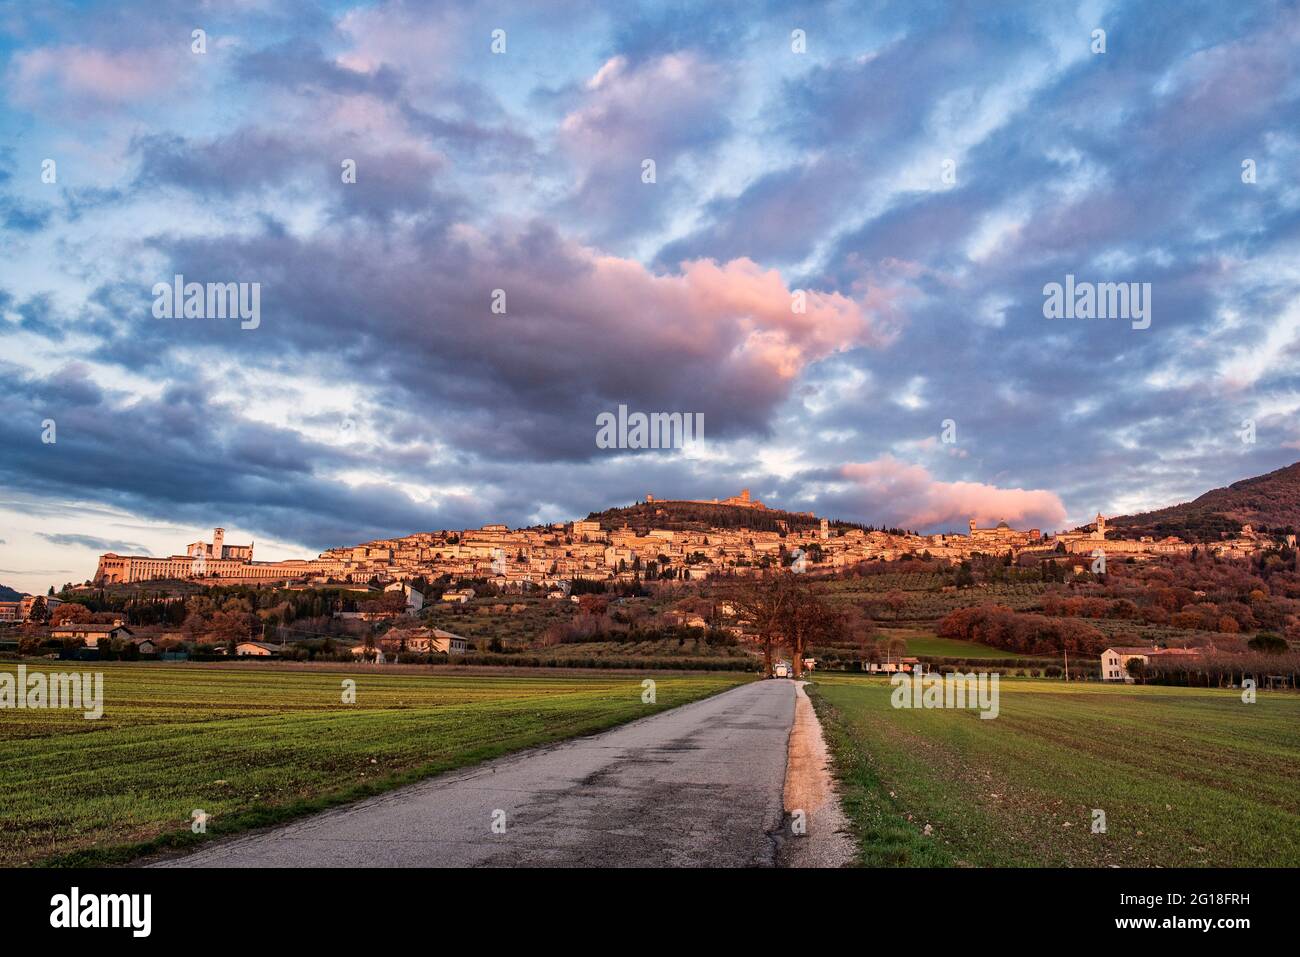 Panorama of Assisi, city of San Francesco, Perugia, Umbria, green heart of Italy. The beautiful sky with clouds and the road in the foreground Stock Photo